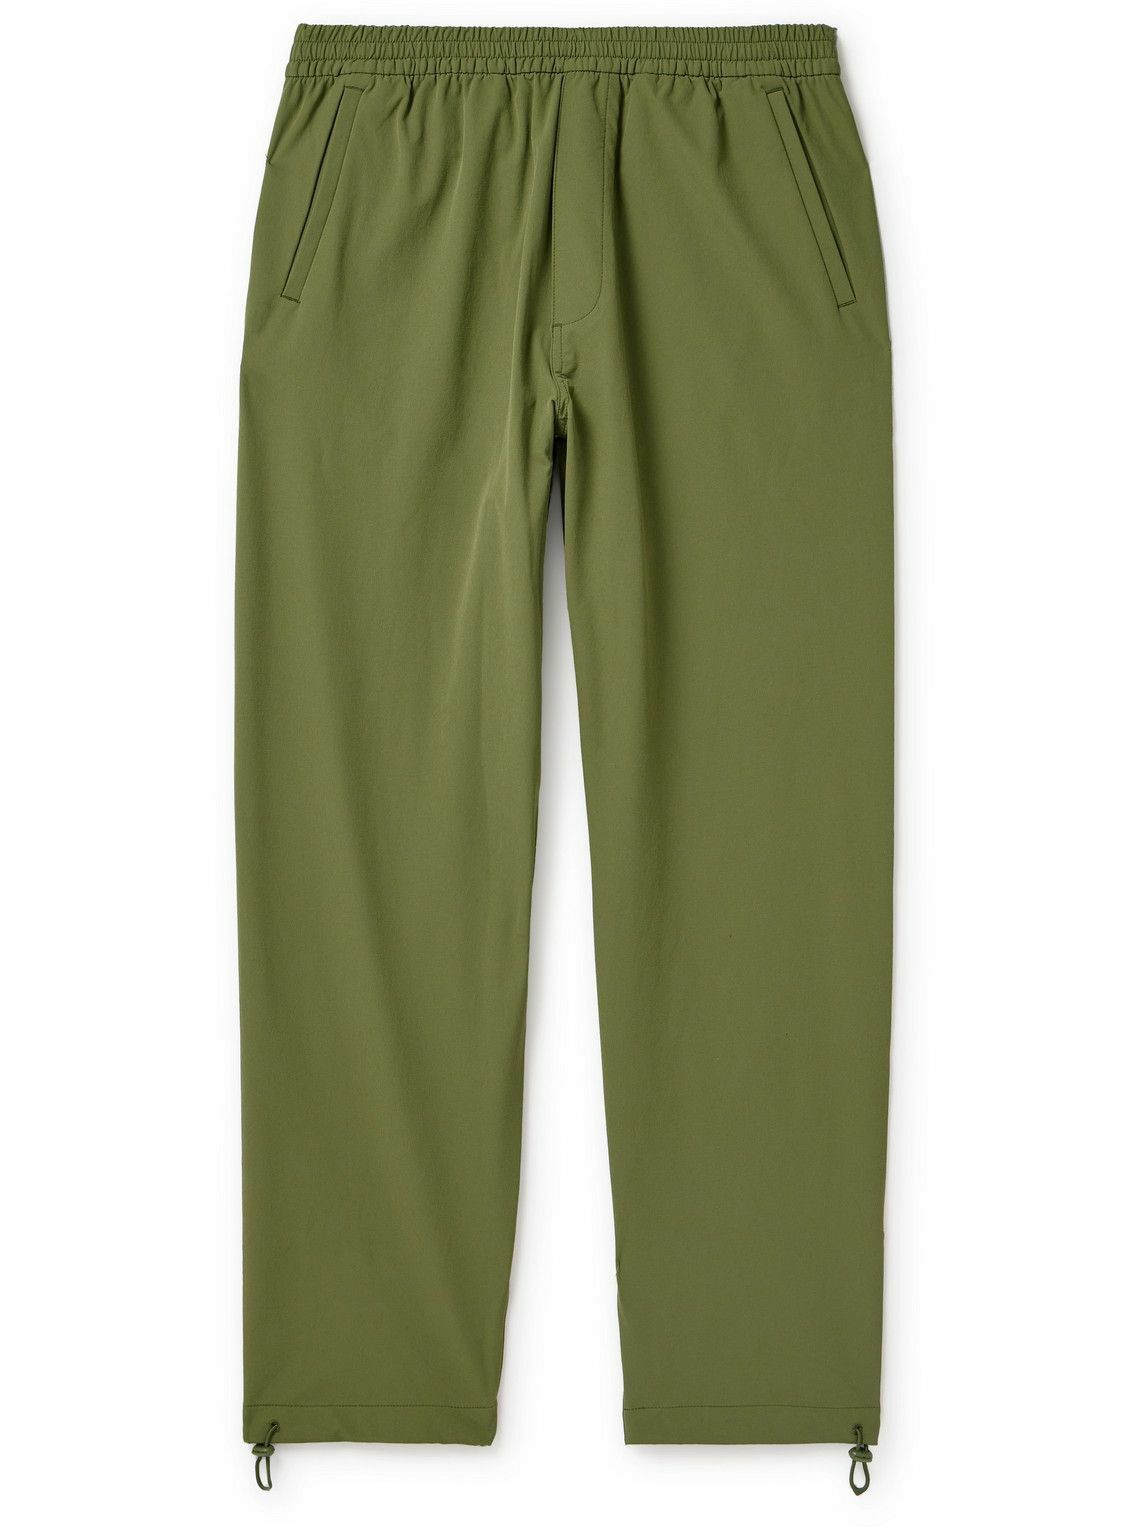 Green Paneled Lounge Pants by Outdoor Voices on Sale